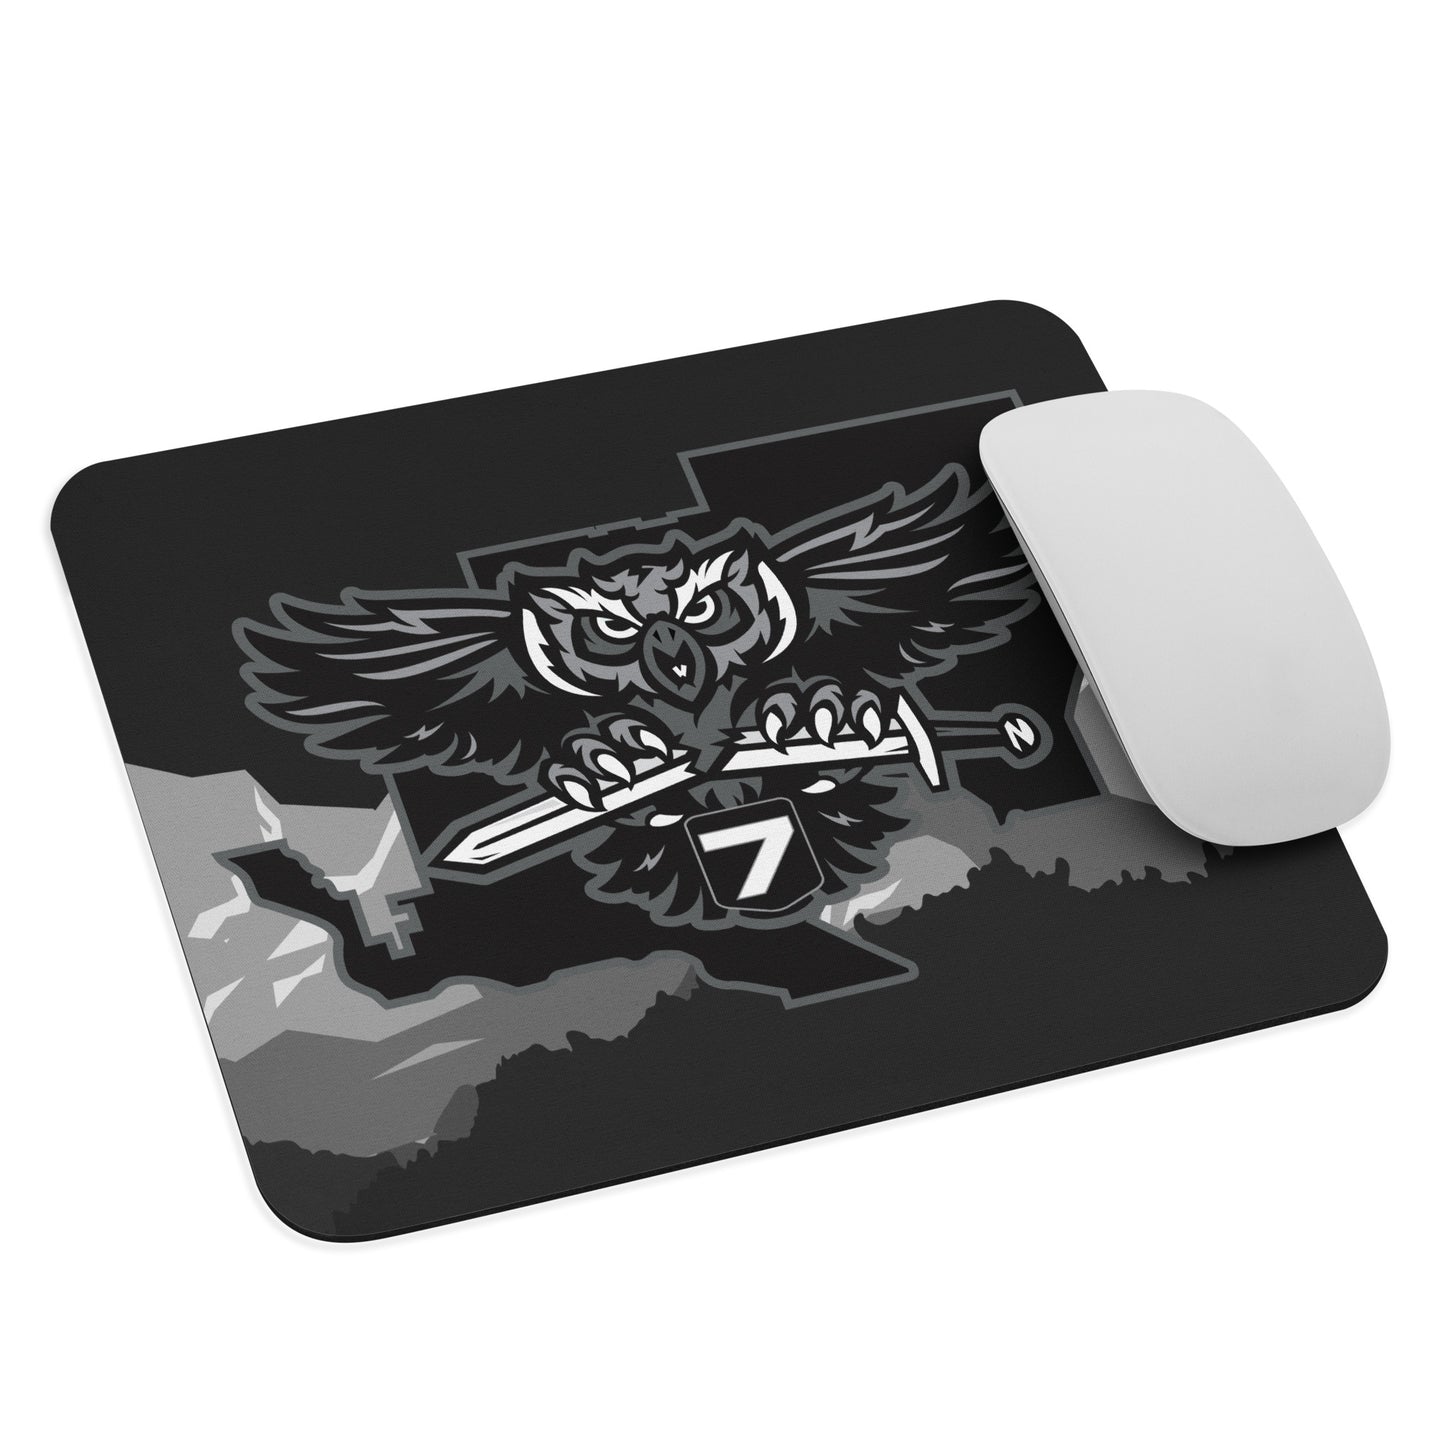 District 7 Mouse pad